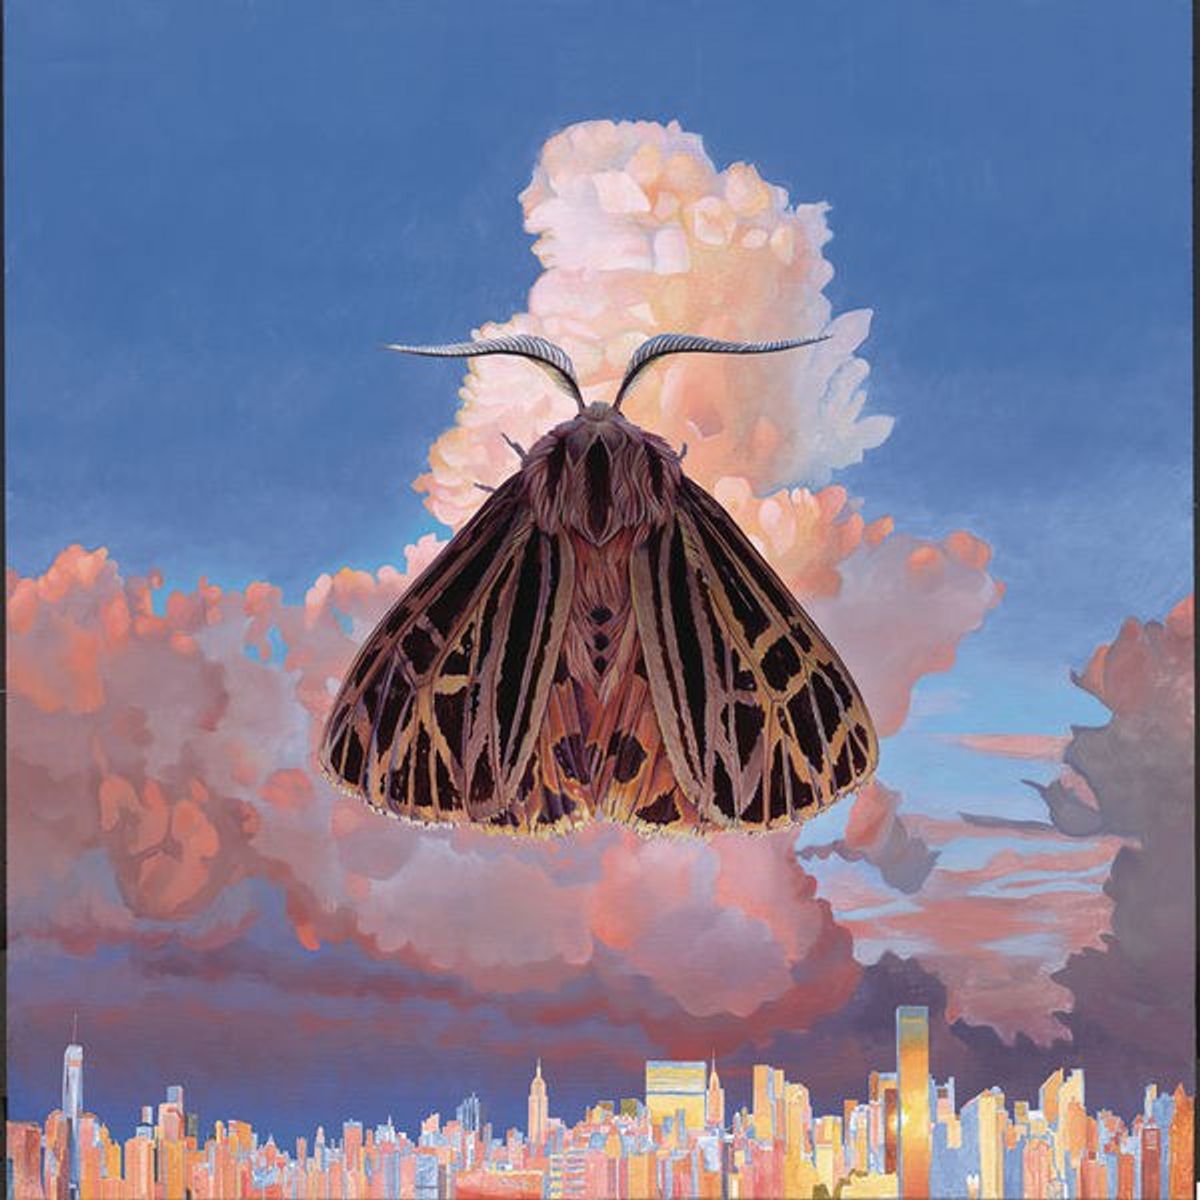 Moth by Chairlift: A Savage Review